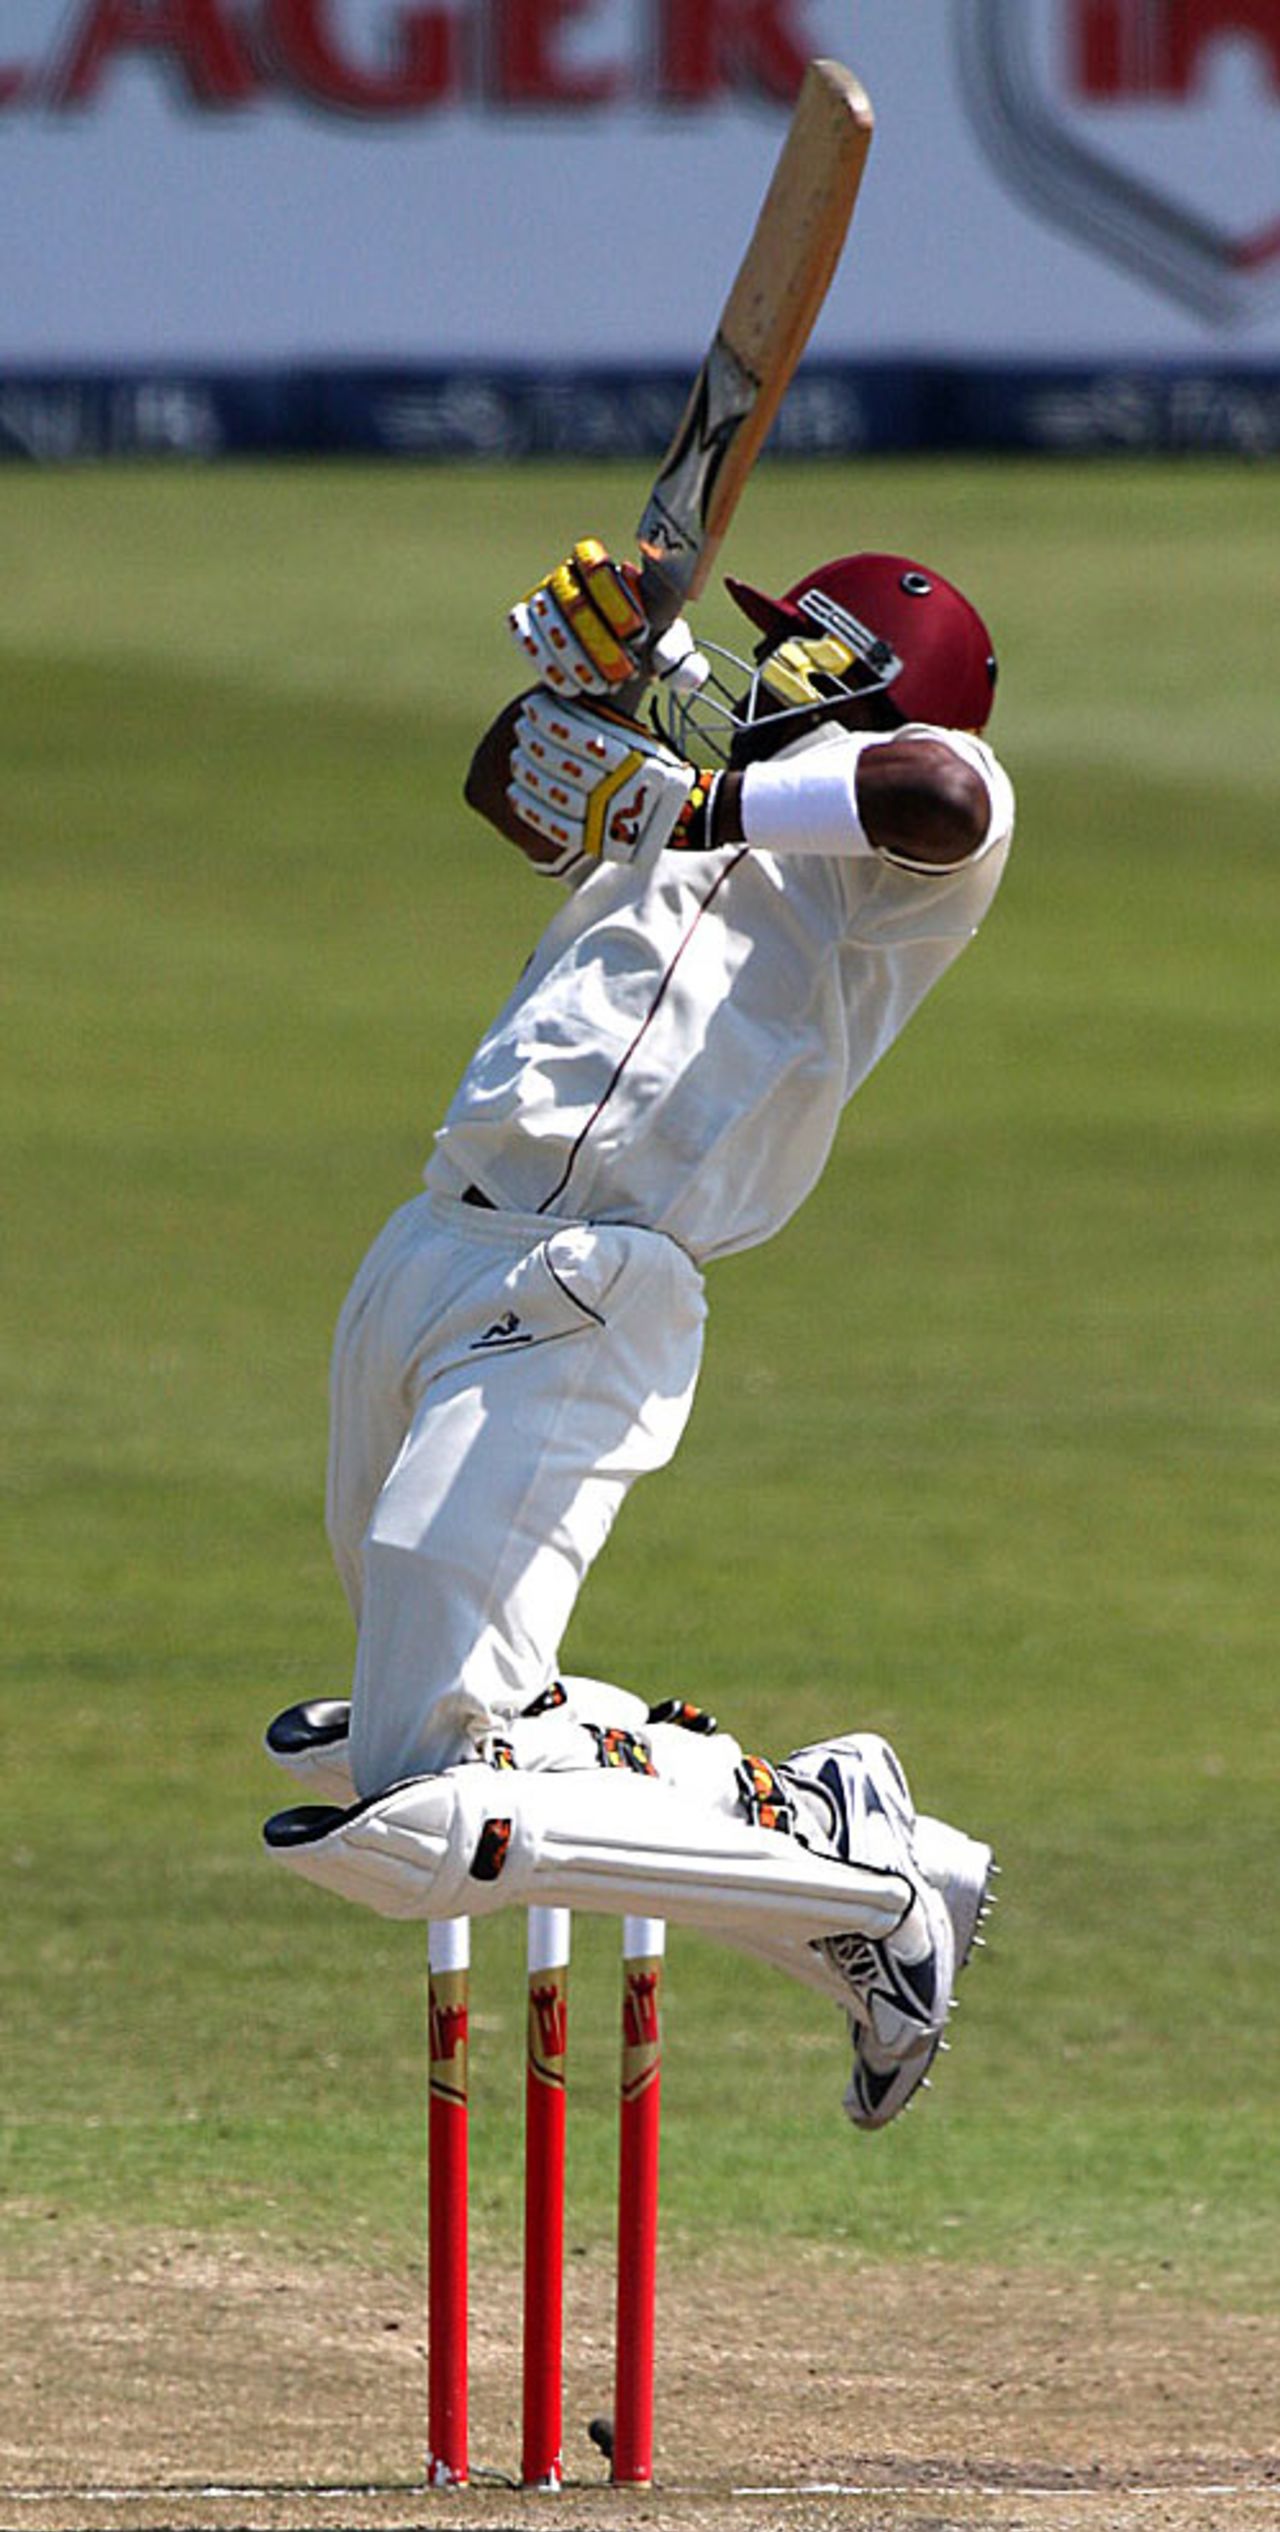 Dwayne Bravo leaps to avoid a bouncer, South Africa v West Indies, 3rd Test, Durban, 3rd day, January 12, 2008 